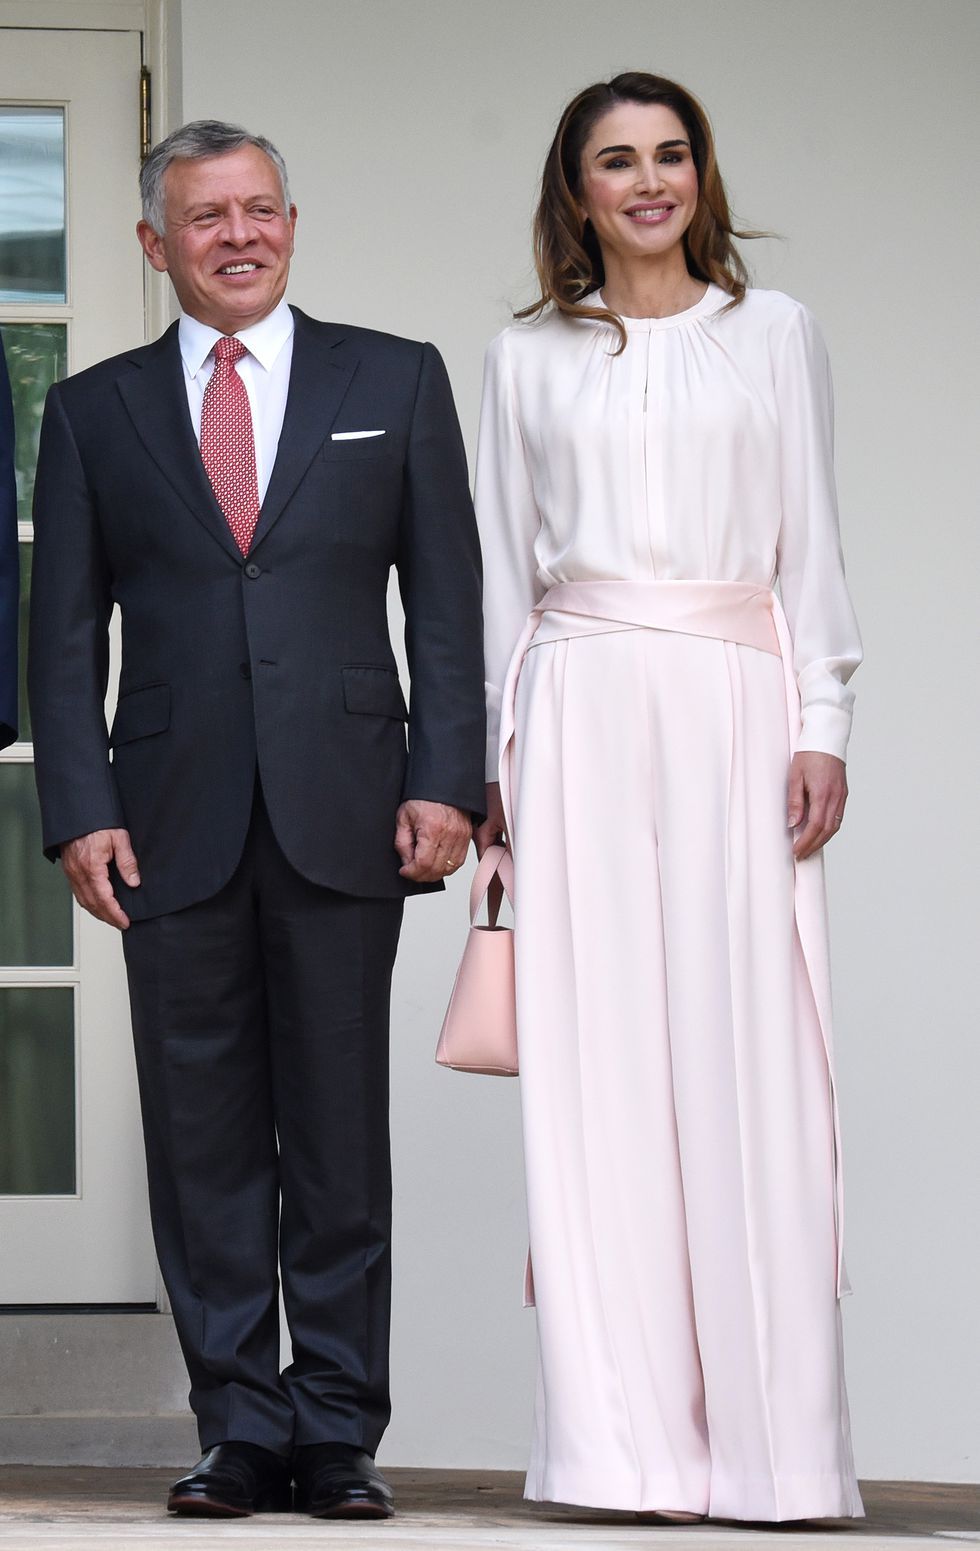 Queen Rania of Jordan Wears Pink to Visit Trumps at White House